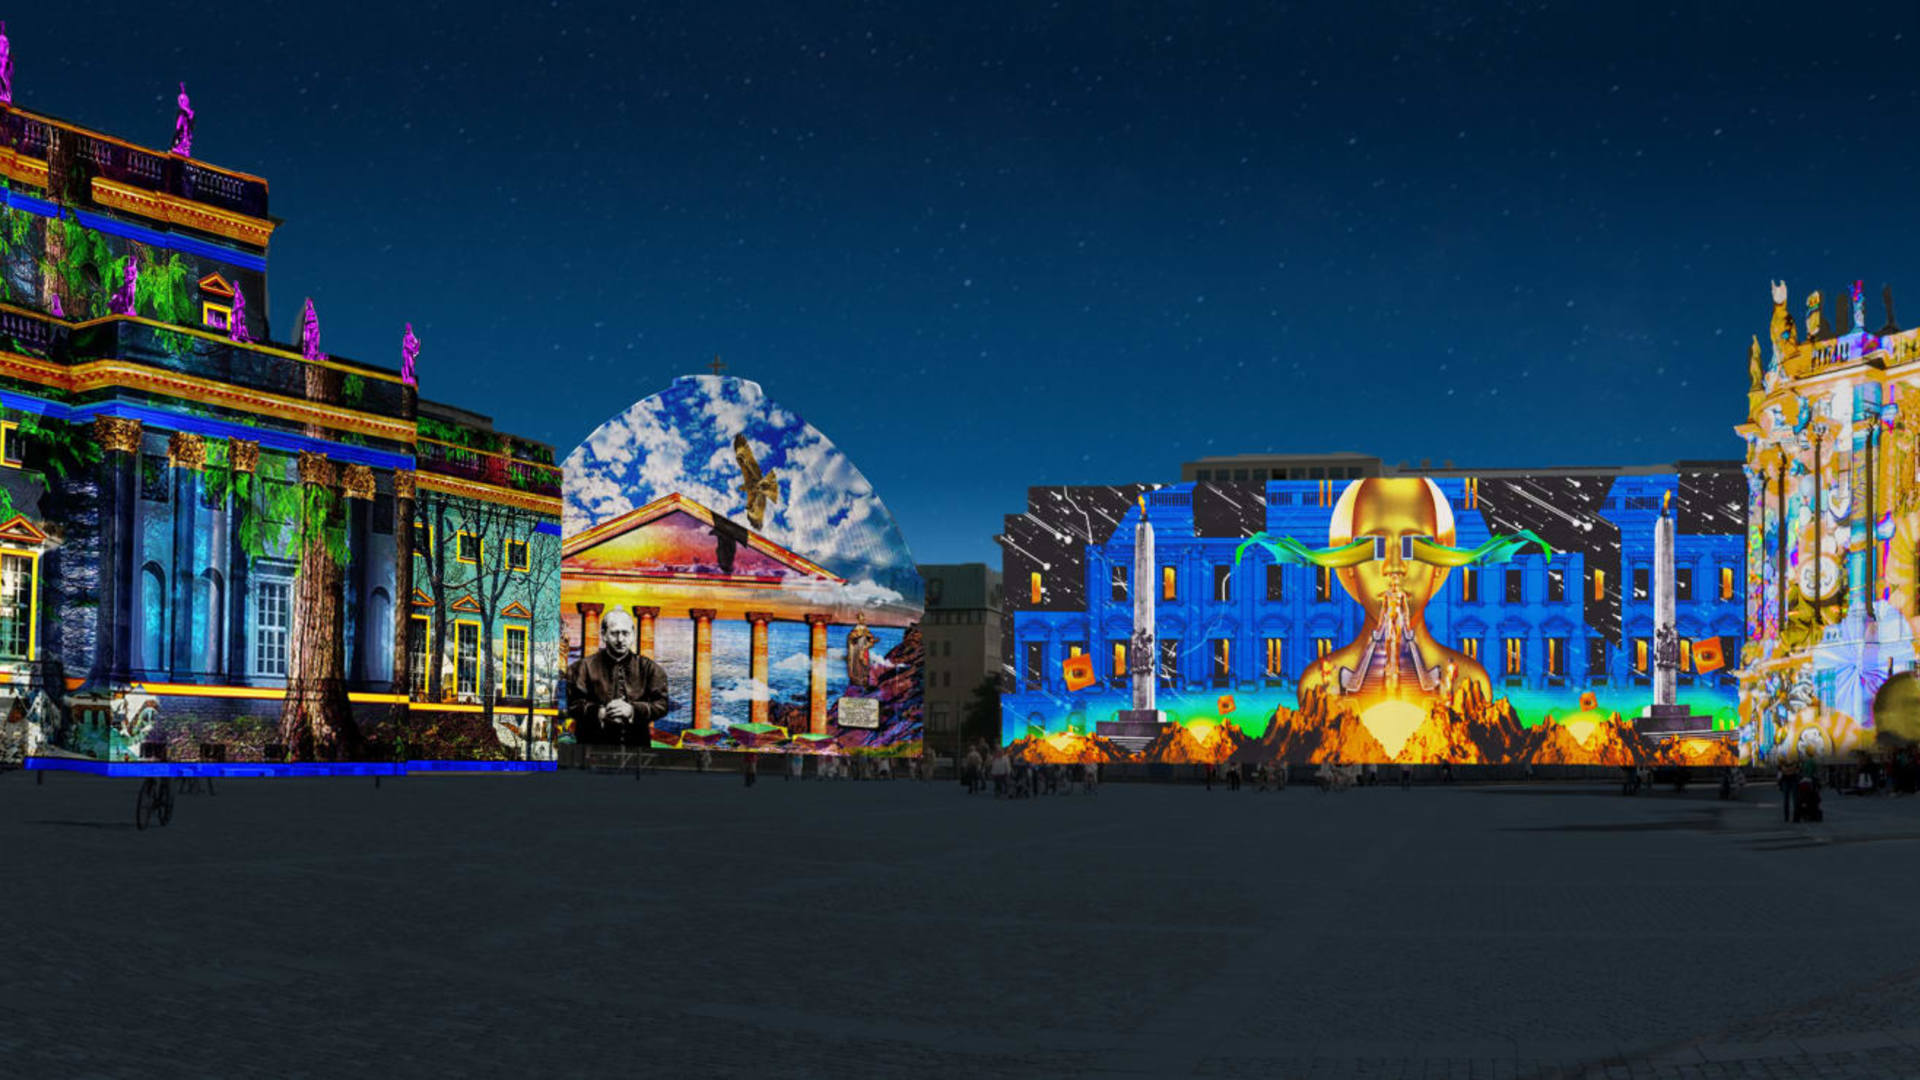 Psychedelic art: What is projection mapping technology?